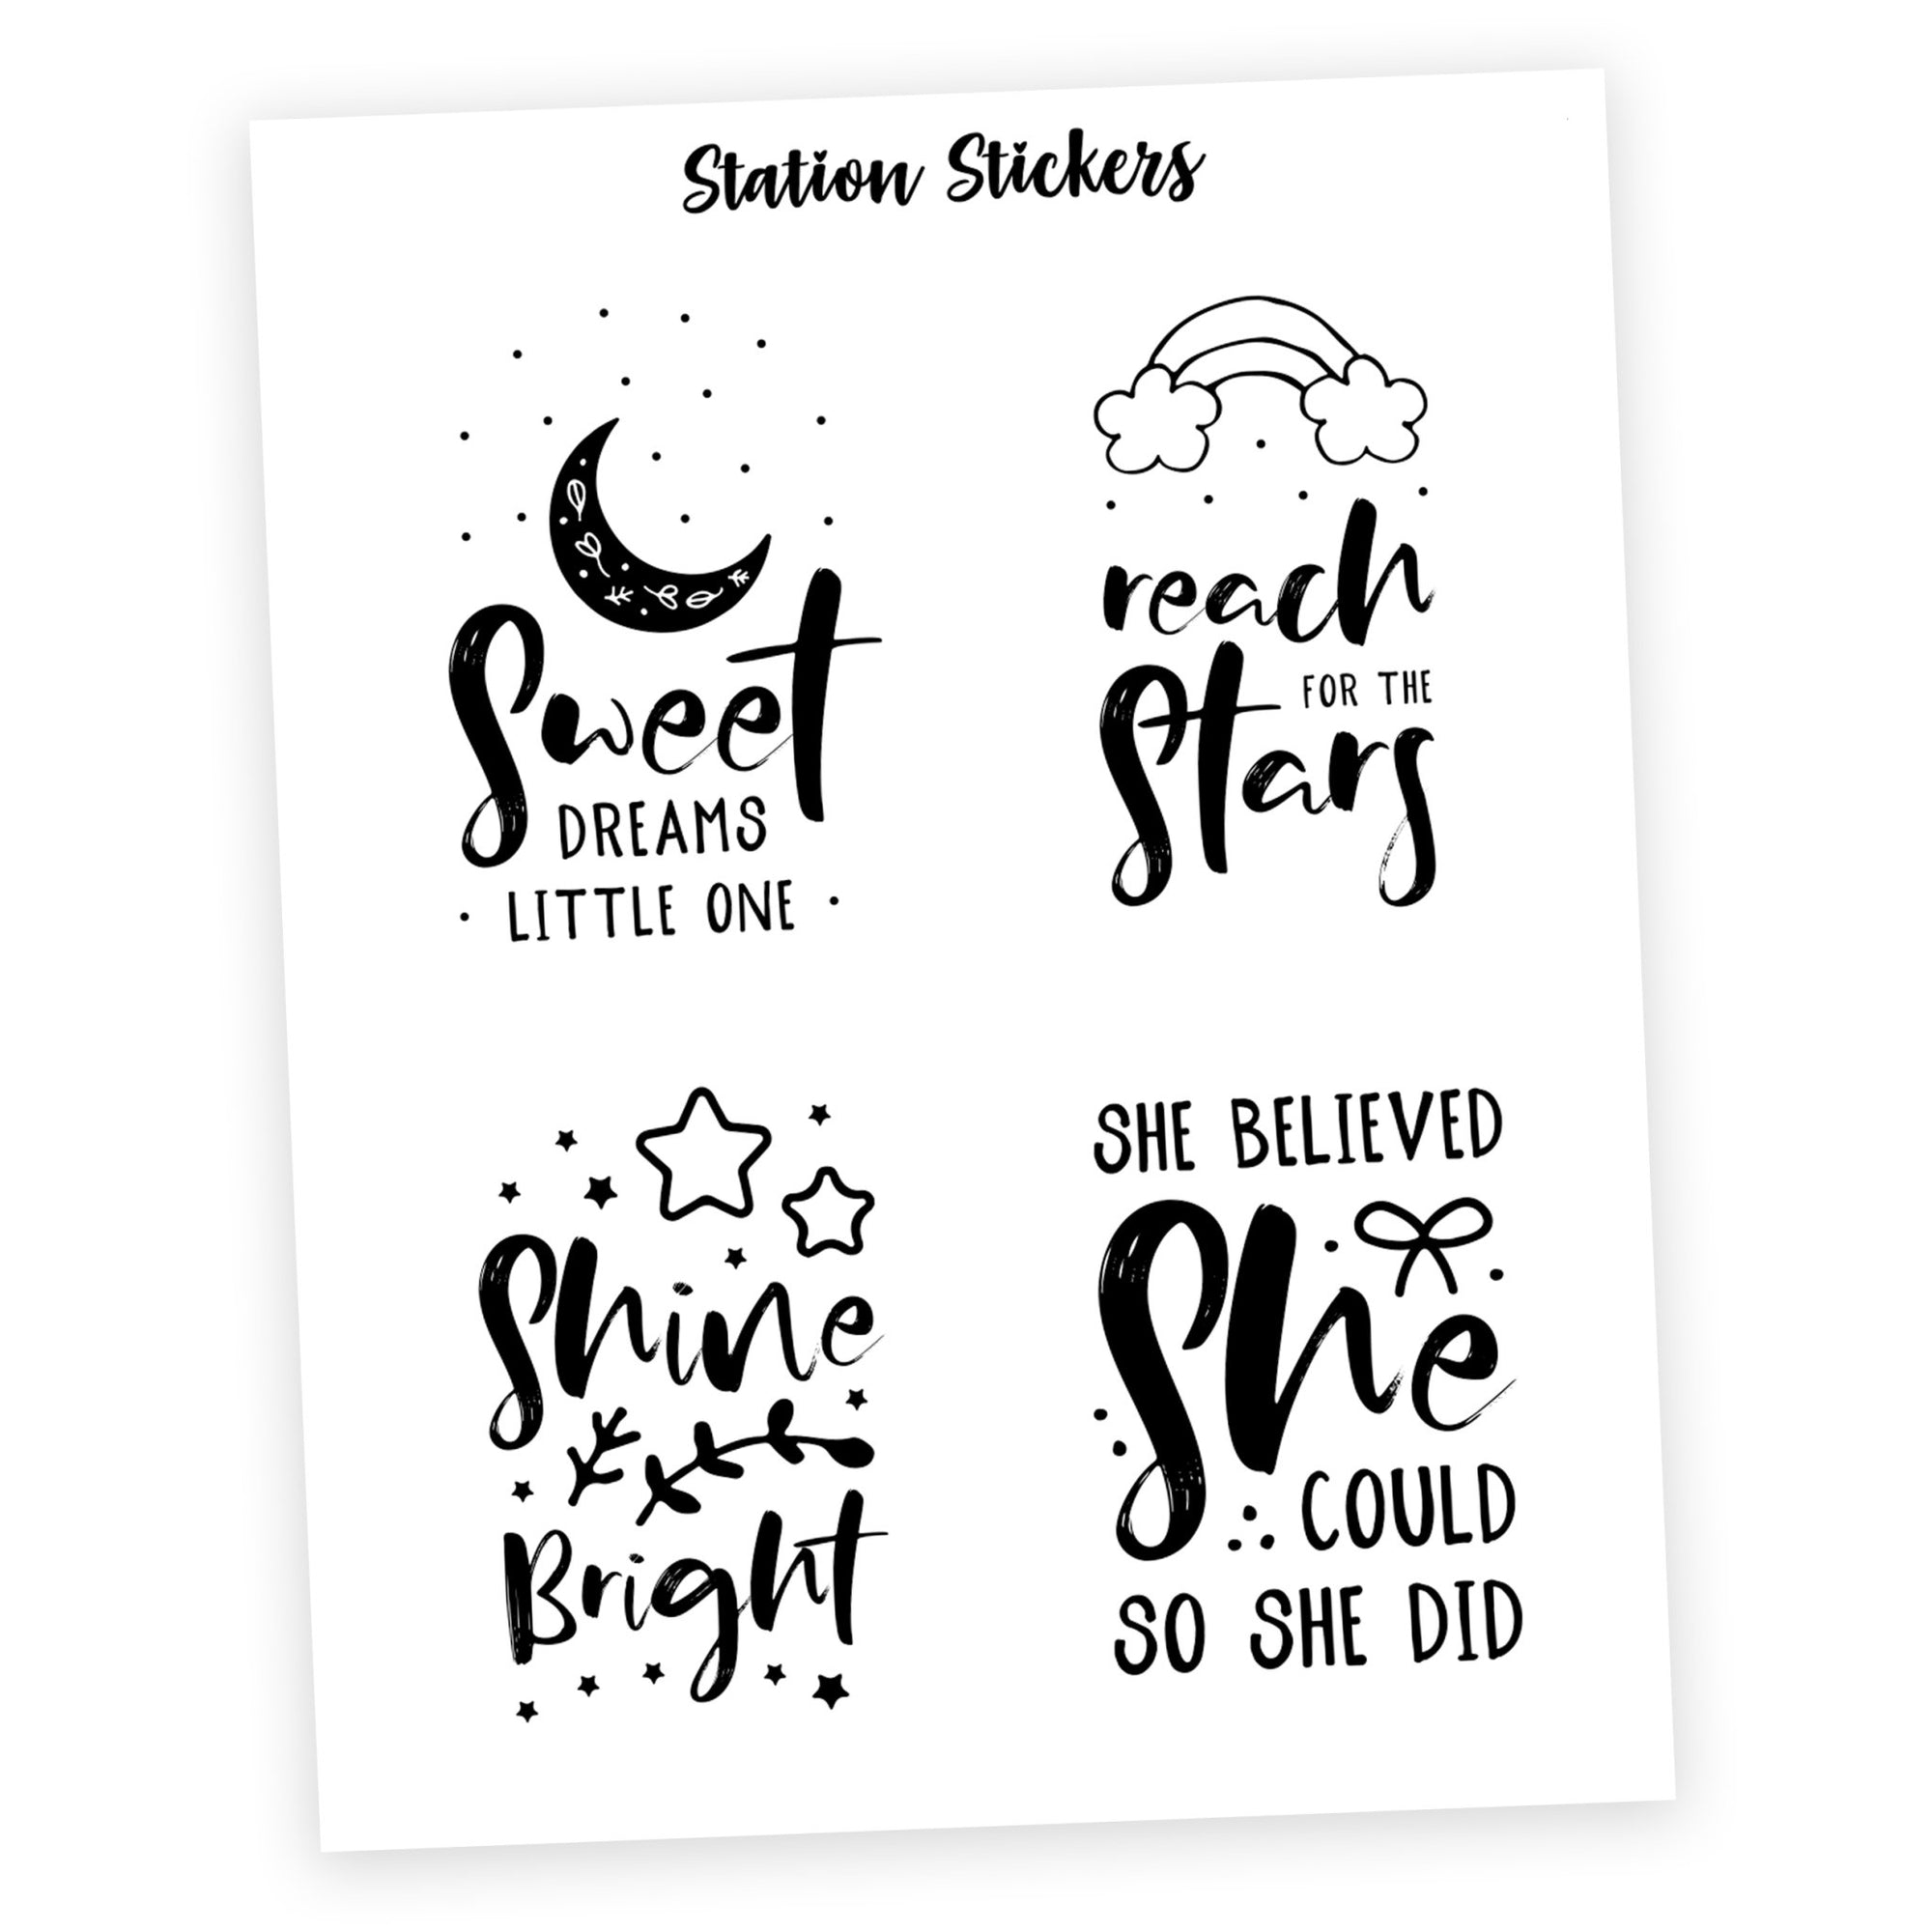 Star Quote Stickers - Station Stickers